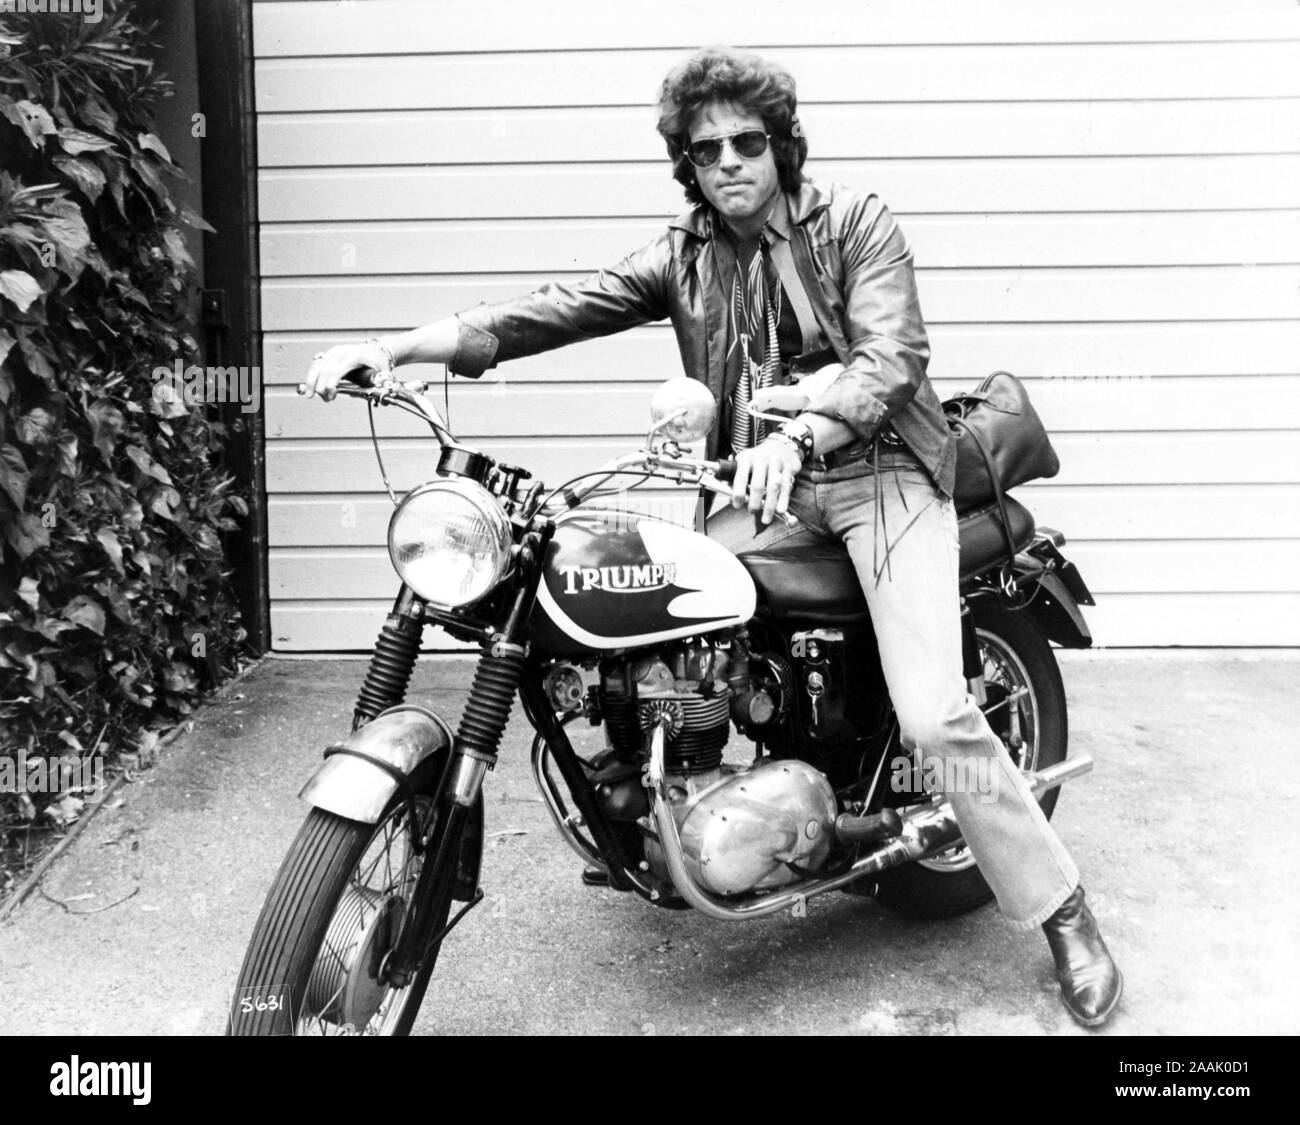 WARREN BEATTY in SHAMPOO (1975), directed by HAL ASHBY. Credit: COLUMBIA PICTURES / Album Stock Photo